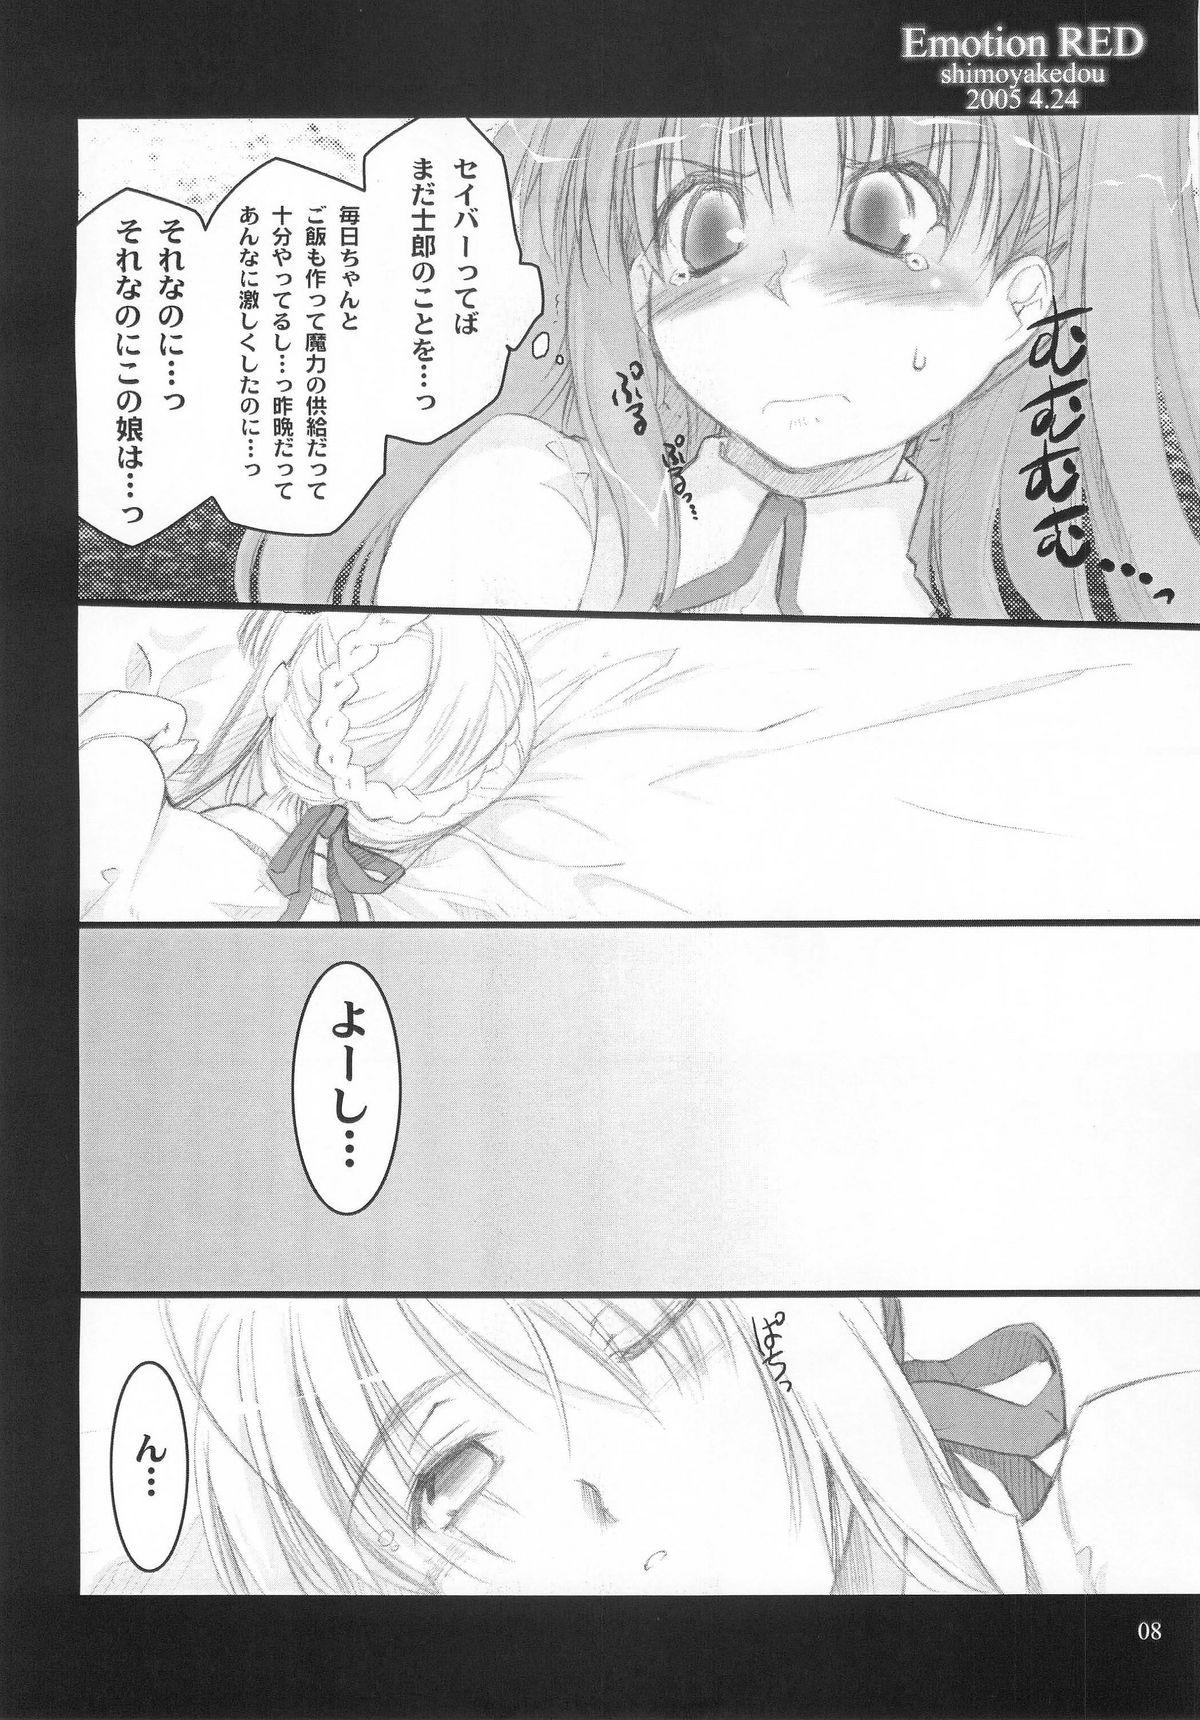 Jerk Off Emotion RED - Fate stay night Slutty - Page 7